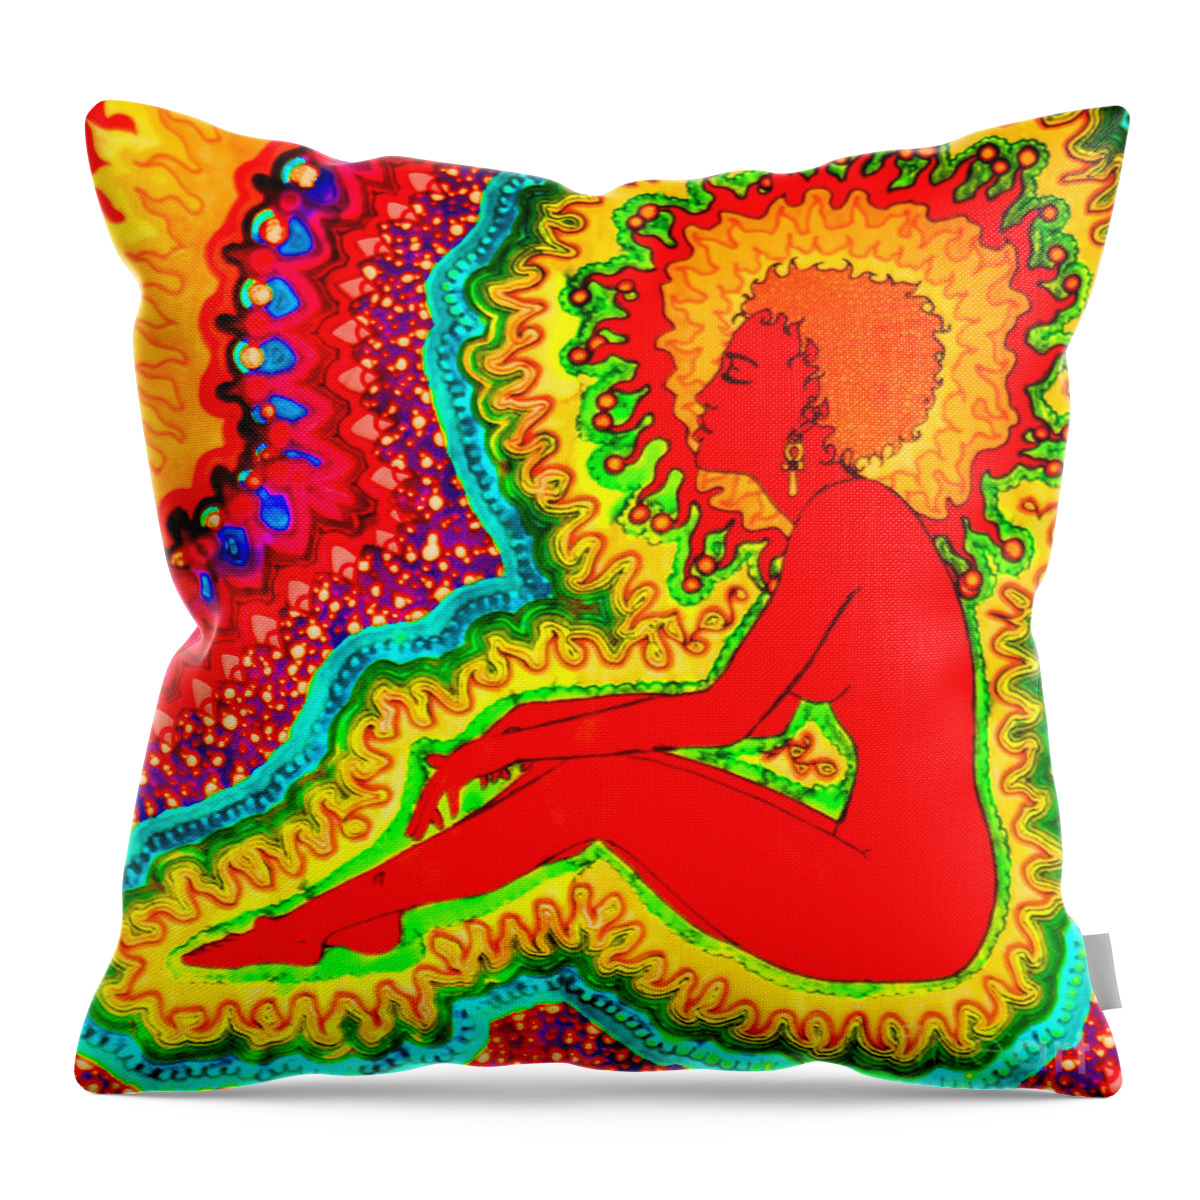 Vibrant Throw Pillow featuring the drawing Vibrant 2 by Baruska A Michalcikova